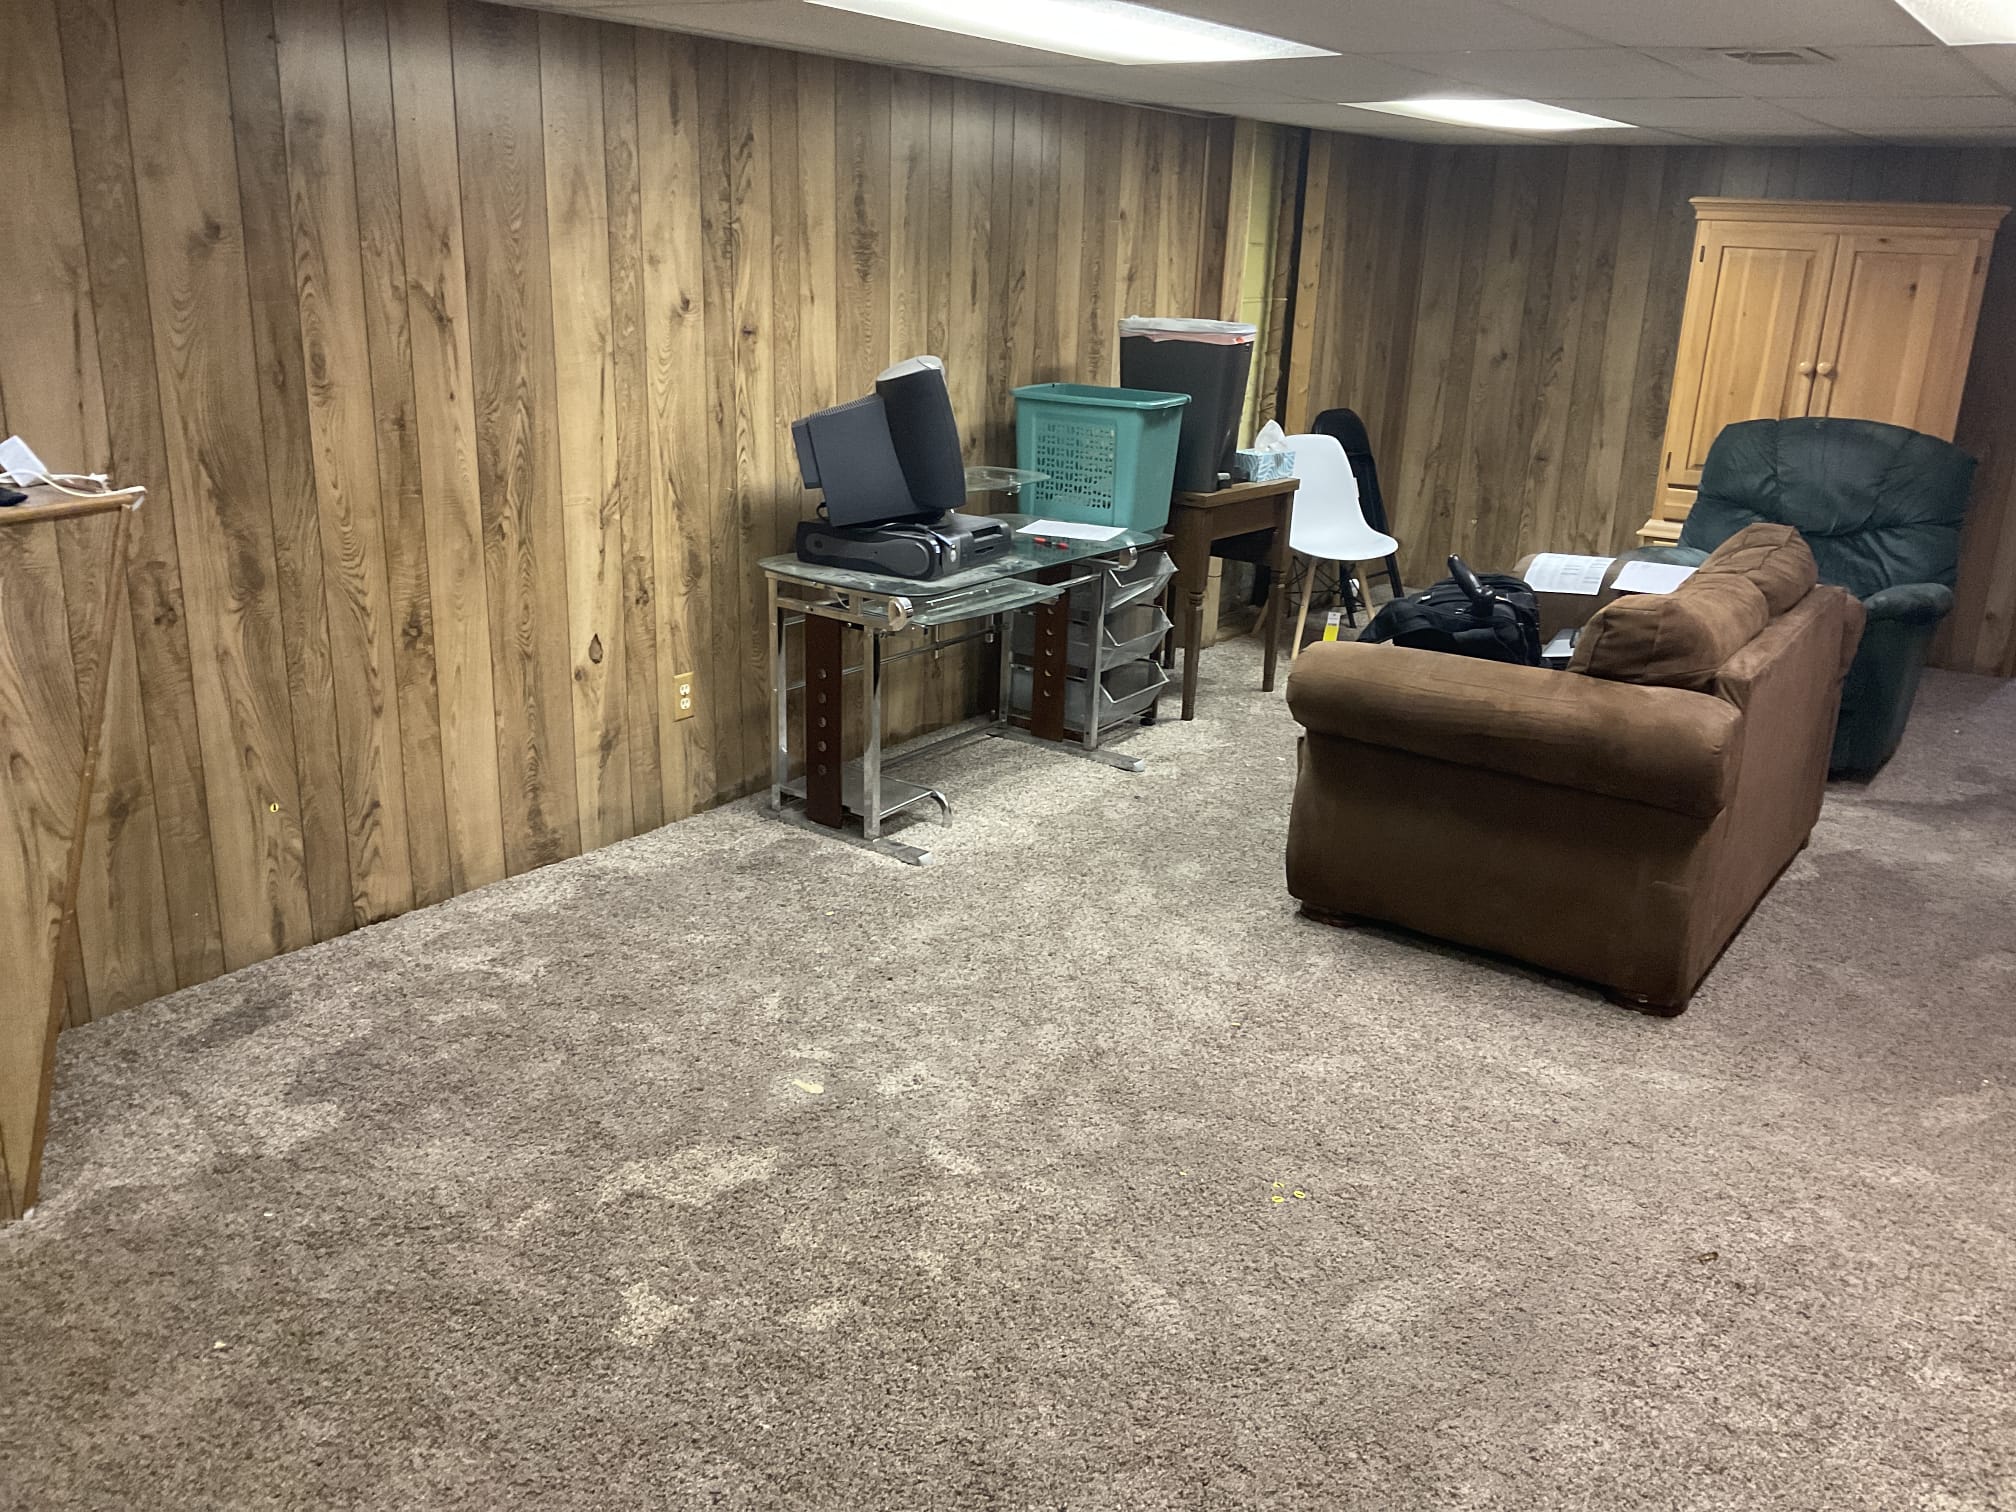 Wet carpet and walls due to foundation leak